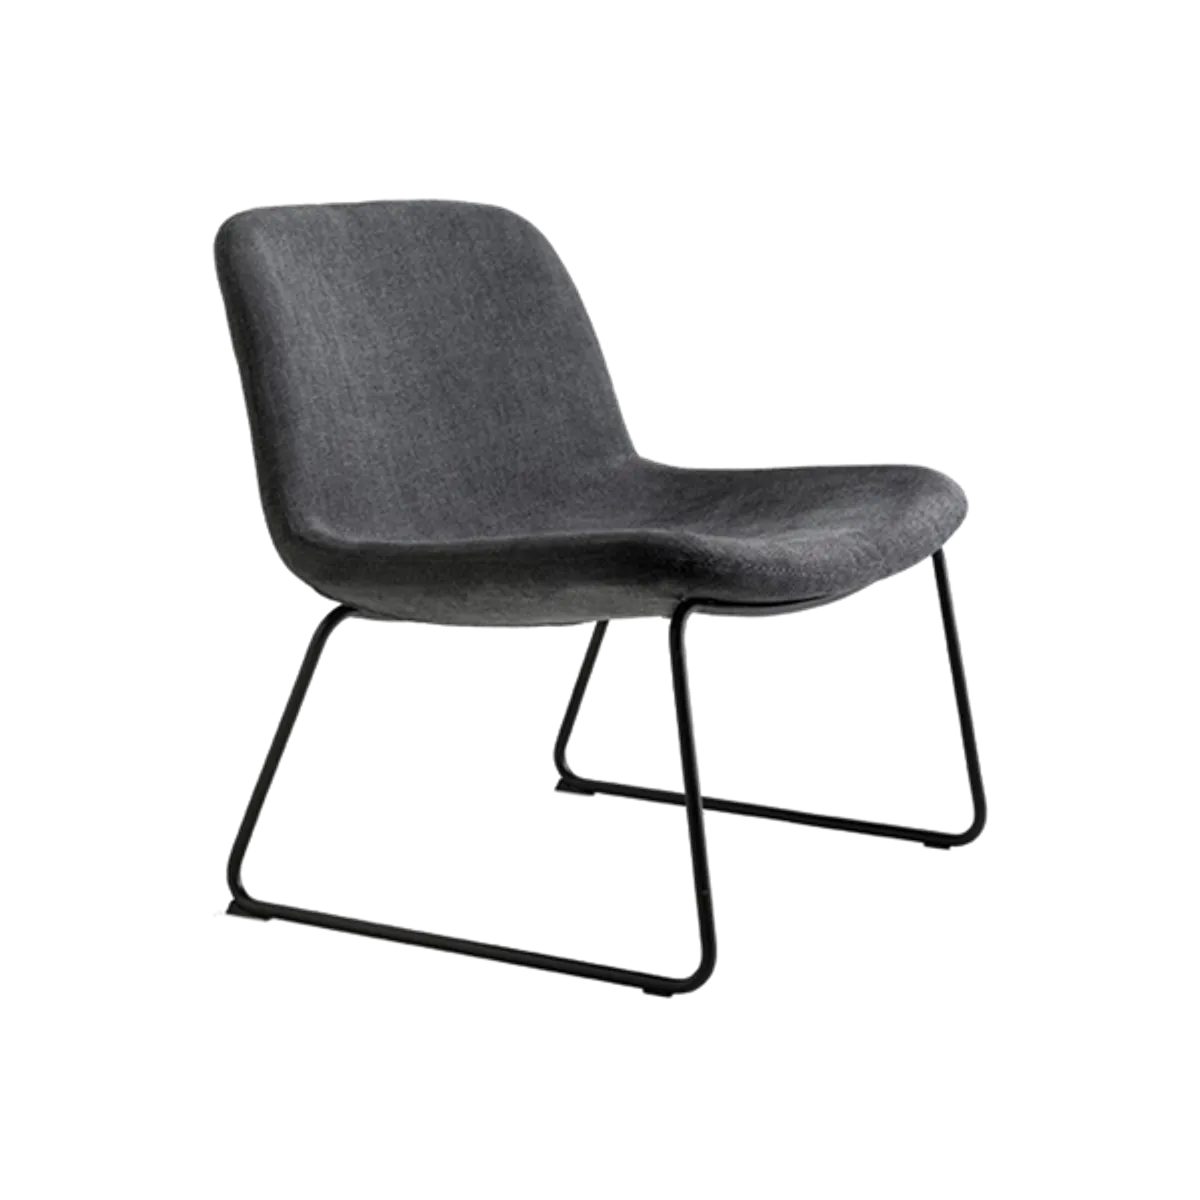 Web College Metal Lounge Chair Grey And Black Inside Out Contracts